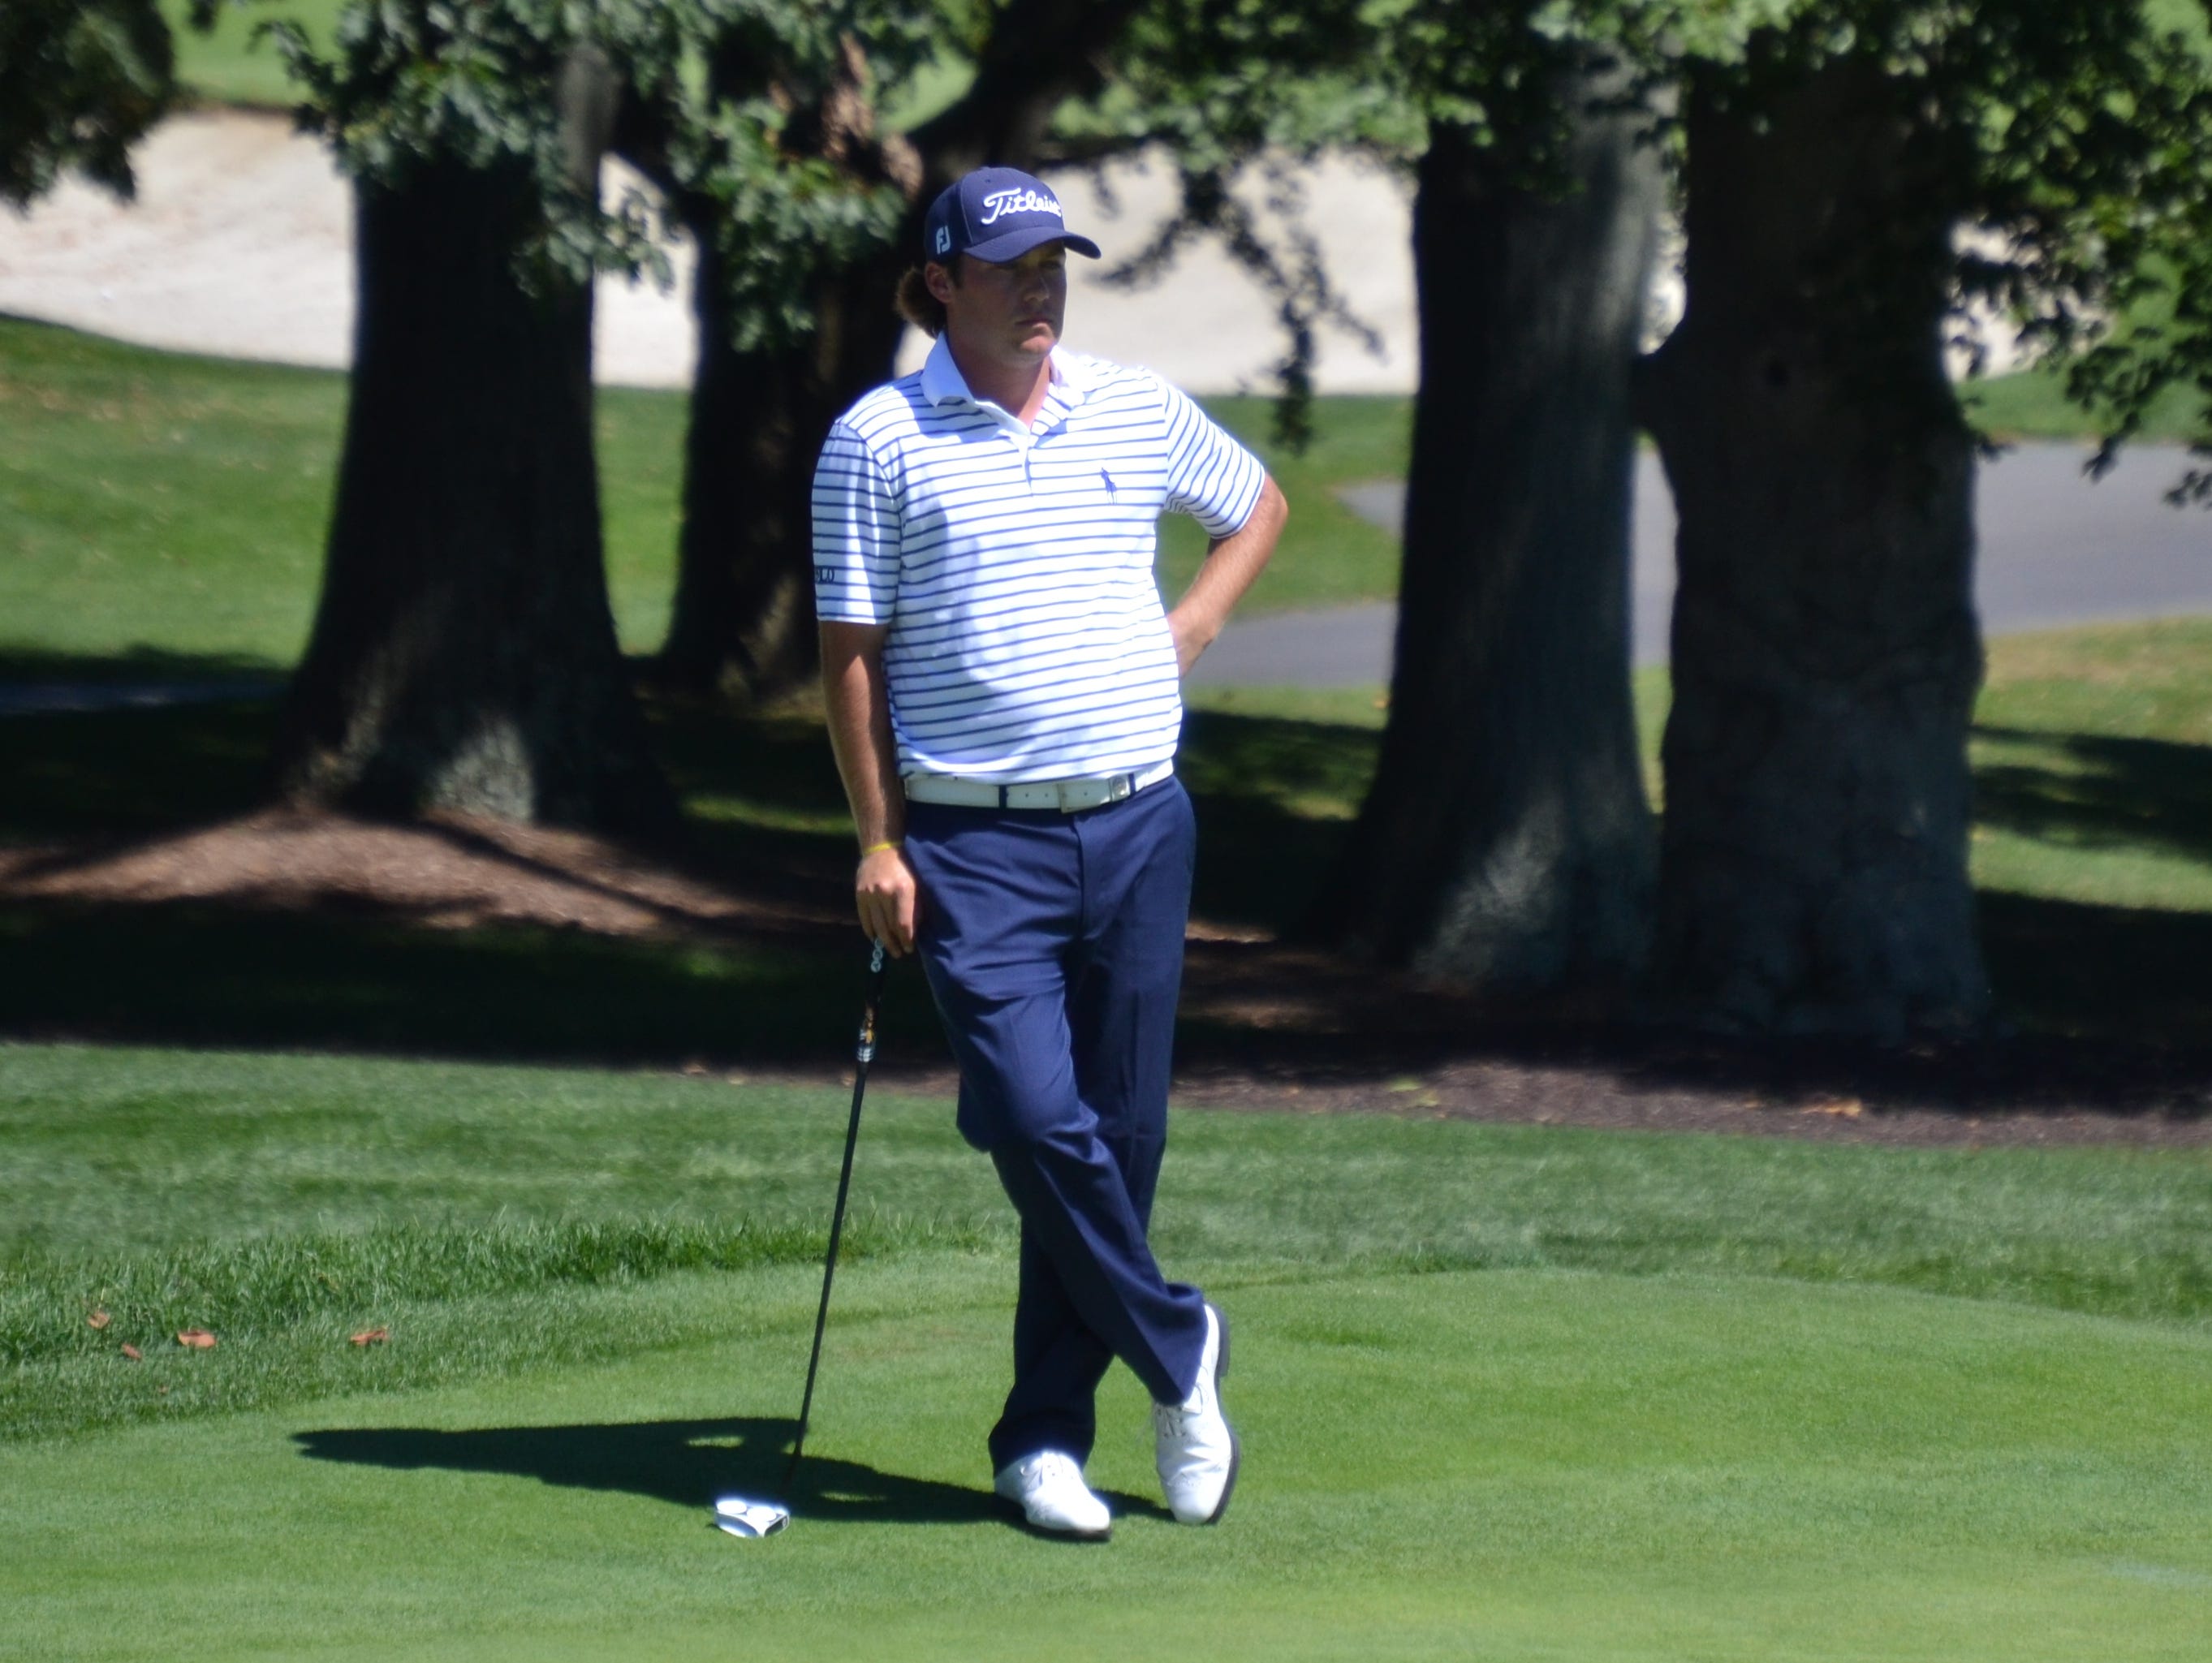 Mike Miller waits to put on the ninth green during the second round of the Met Open on Tuesday at Glen Oaks. The Brewster native dropped a birdie to close out a round of 2-under 68.